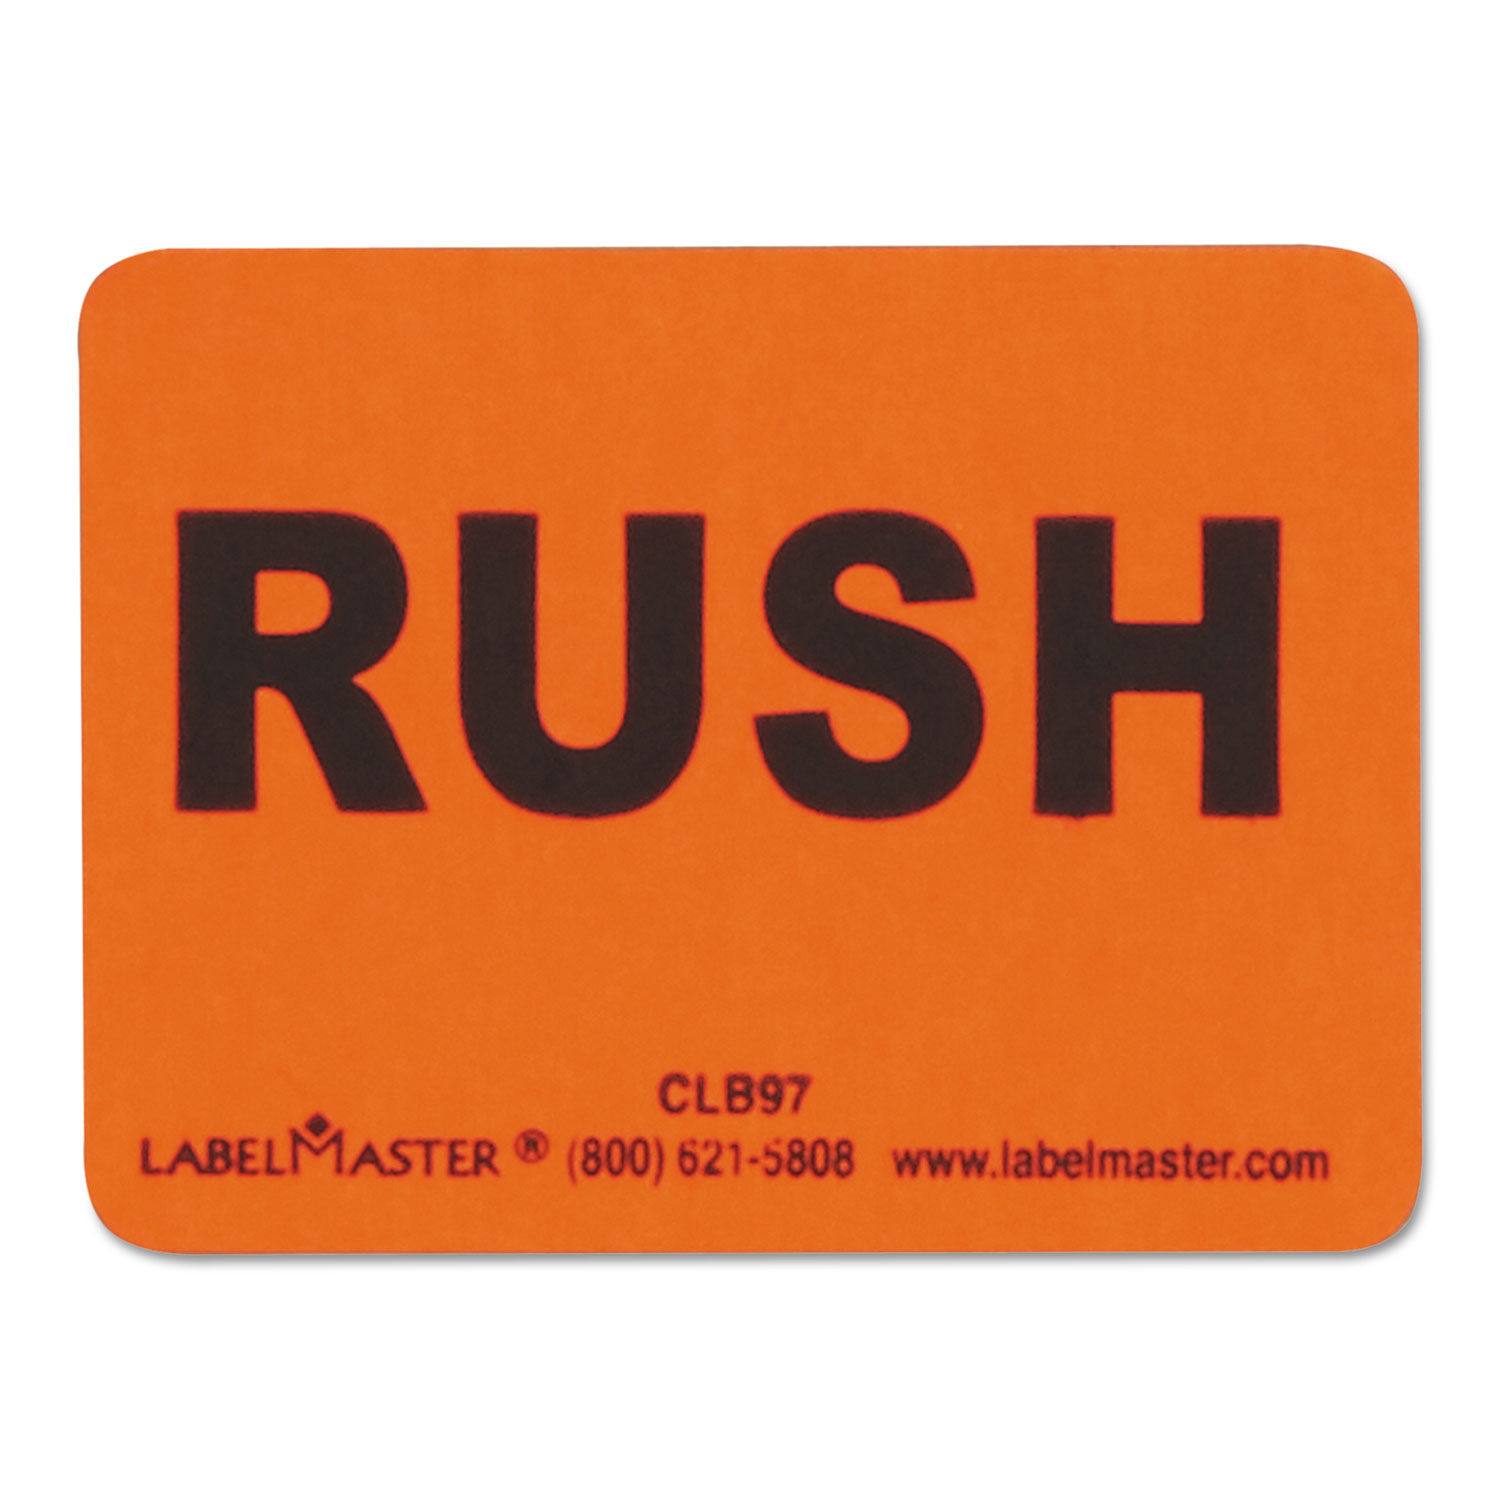  LabelMaster CLB97 Shipping and Handling Self-Adhesive Labels, RUSH, 2.5 x 4.5, Black/Red, 500/Roll (LMTCLB97) 